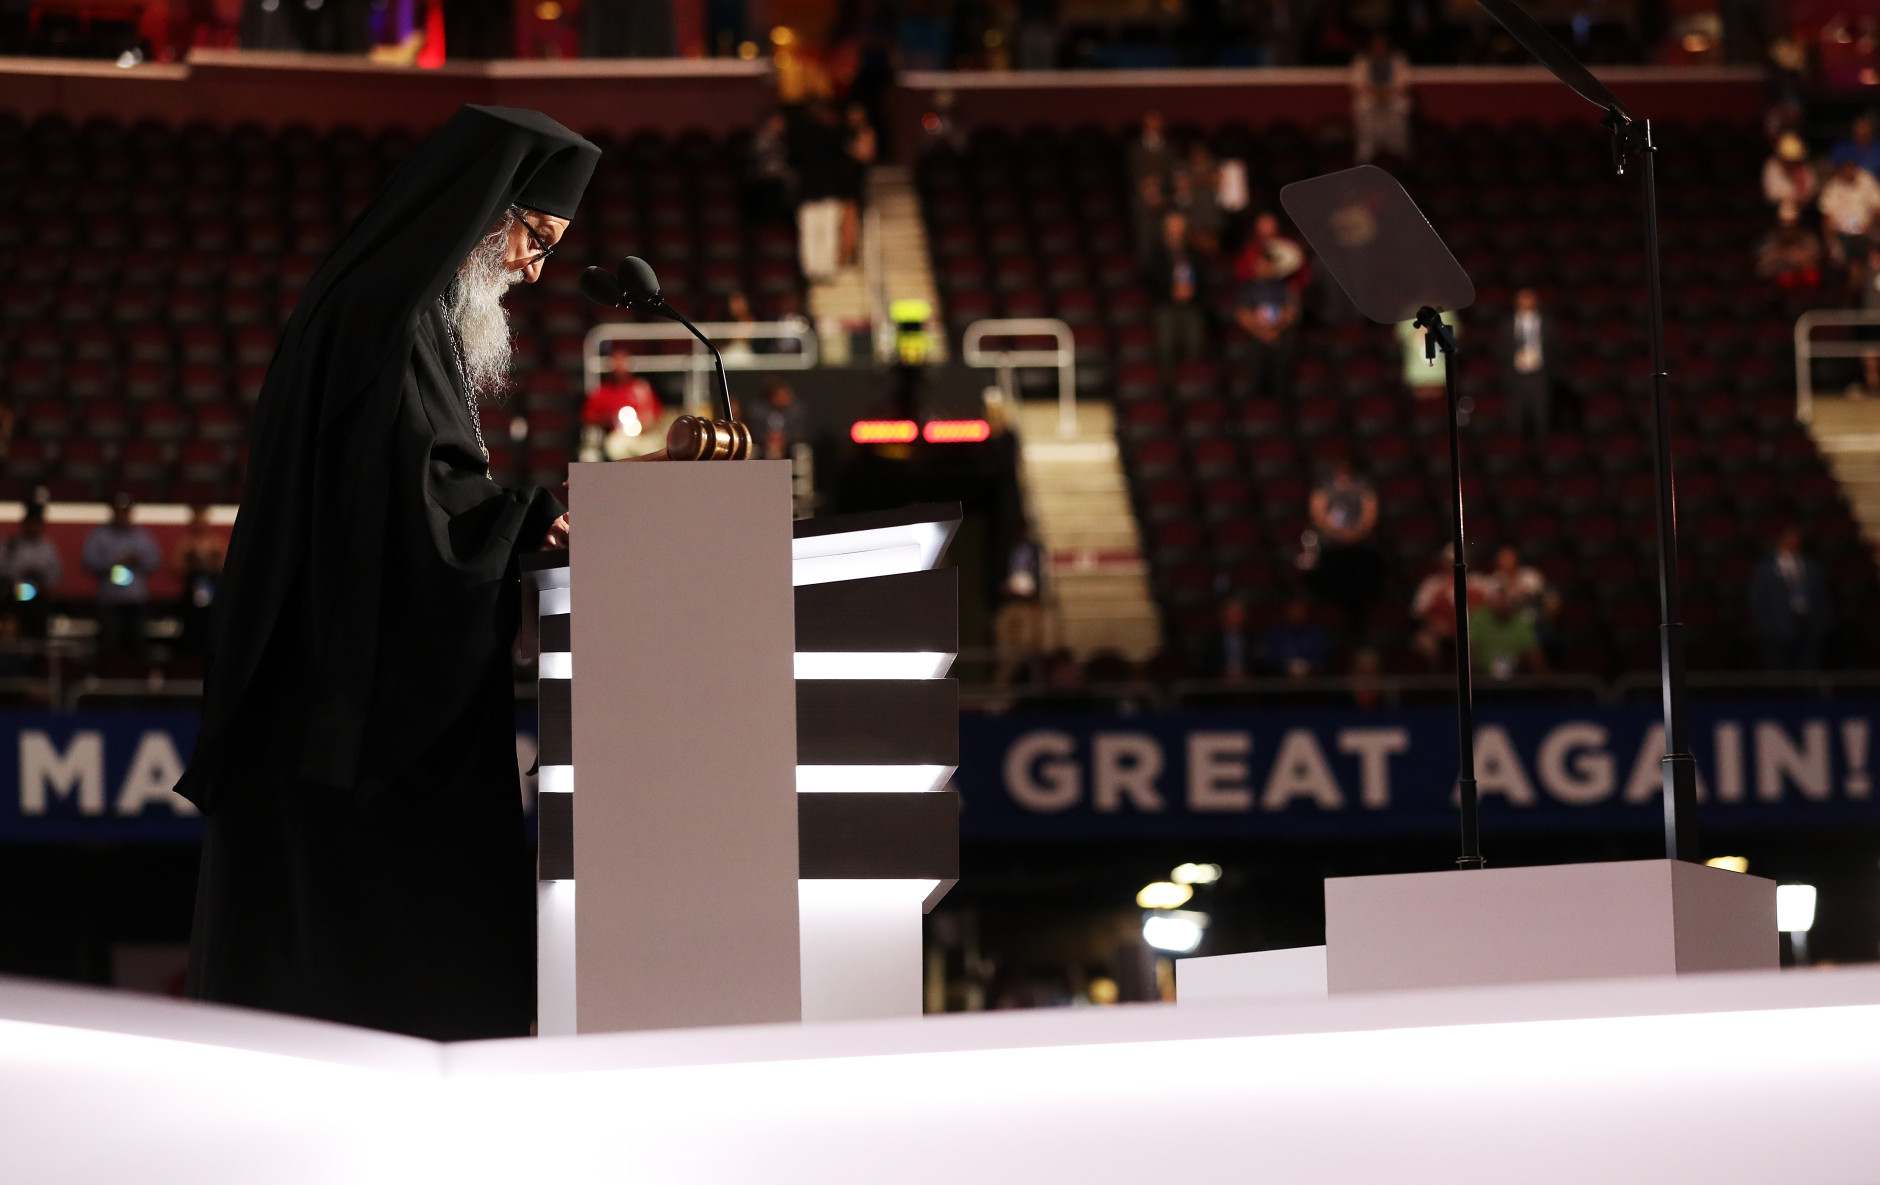 CLEVELAND, OH - JULY 20: Archbishop Demetrios delivers the closing prayer on the third day of the Republican National Convention on July 20, 2016 at the Quicken Loans Arena in Cleveland, Ohio. Republican presidential candidate Donald Trump received the number of votes needed to secure the party's nomination. An estimated 50,000 people are expected in Cleveland, including hundreds of protesters and members of the media. The four-day Republican National Convention kicked off on July 18. (Photo by John Moore/Getty Images)